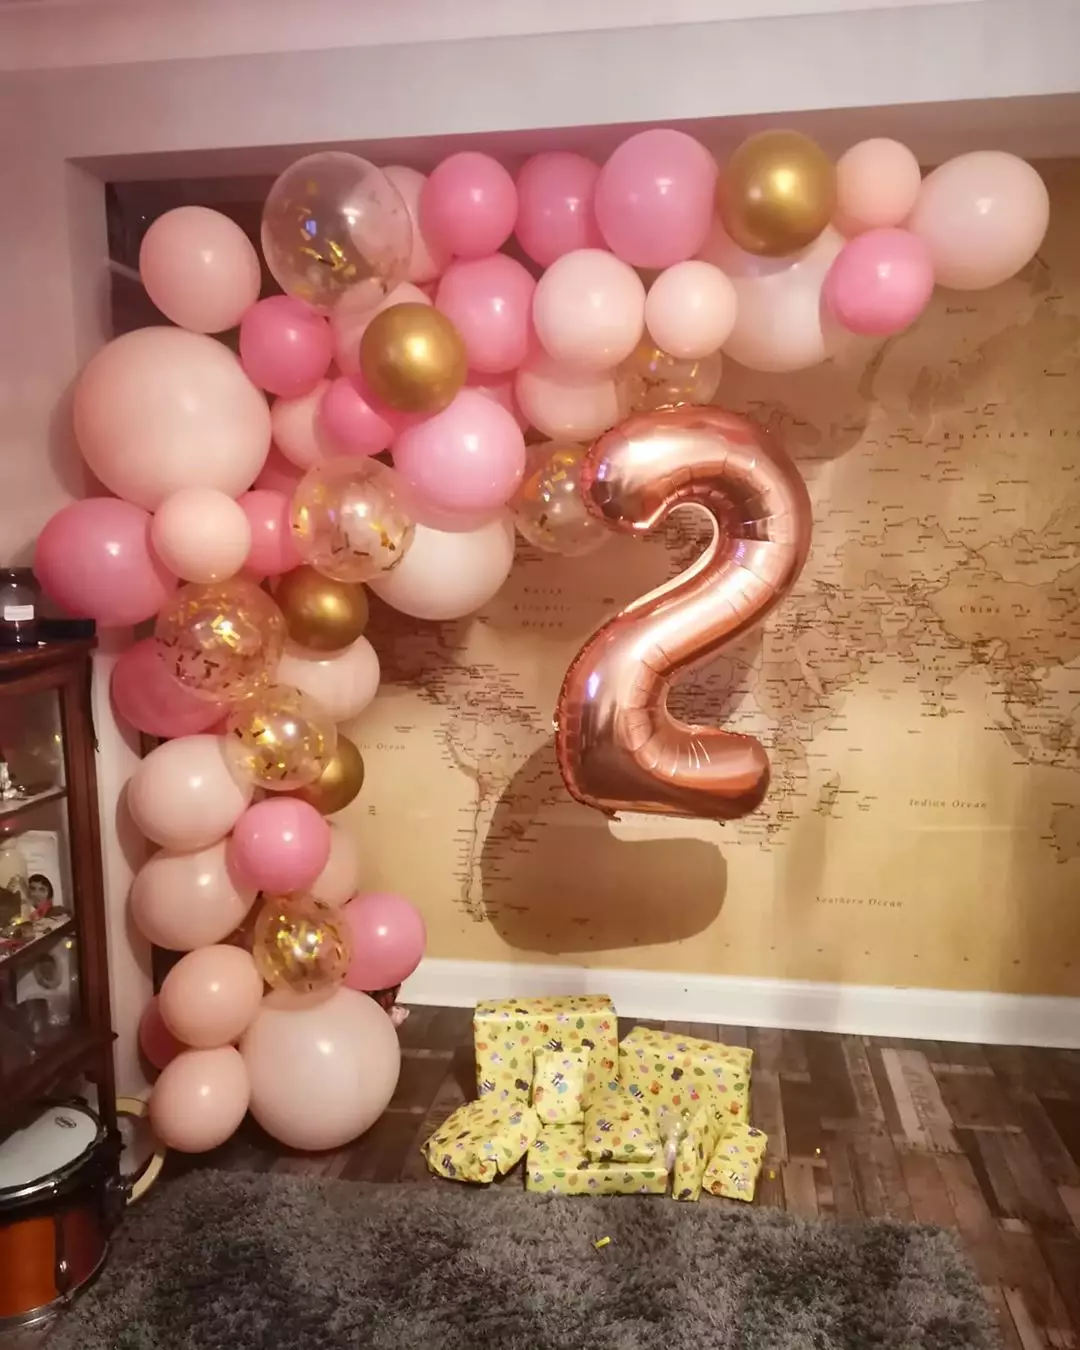 Molly's balloon arch in pink and gold took 2 hours to assemble and looks spectacular! (